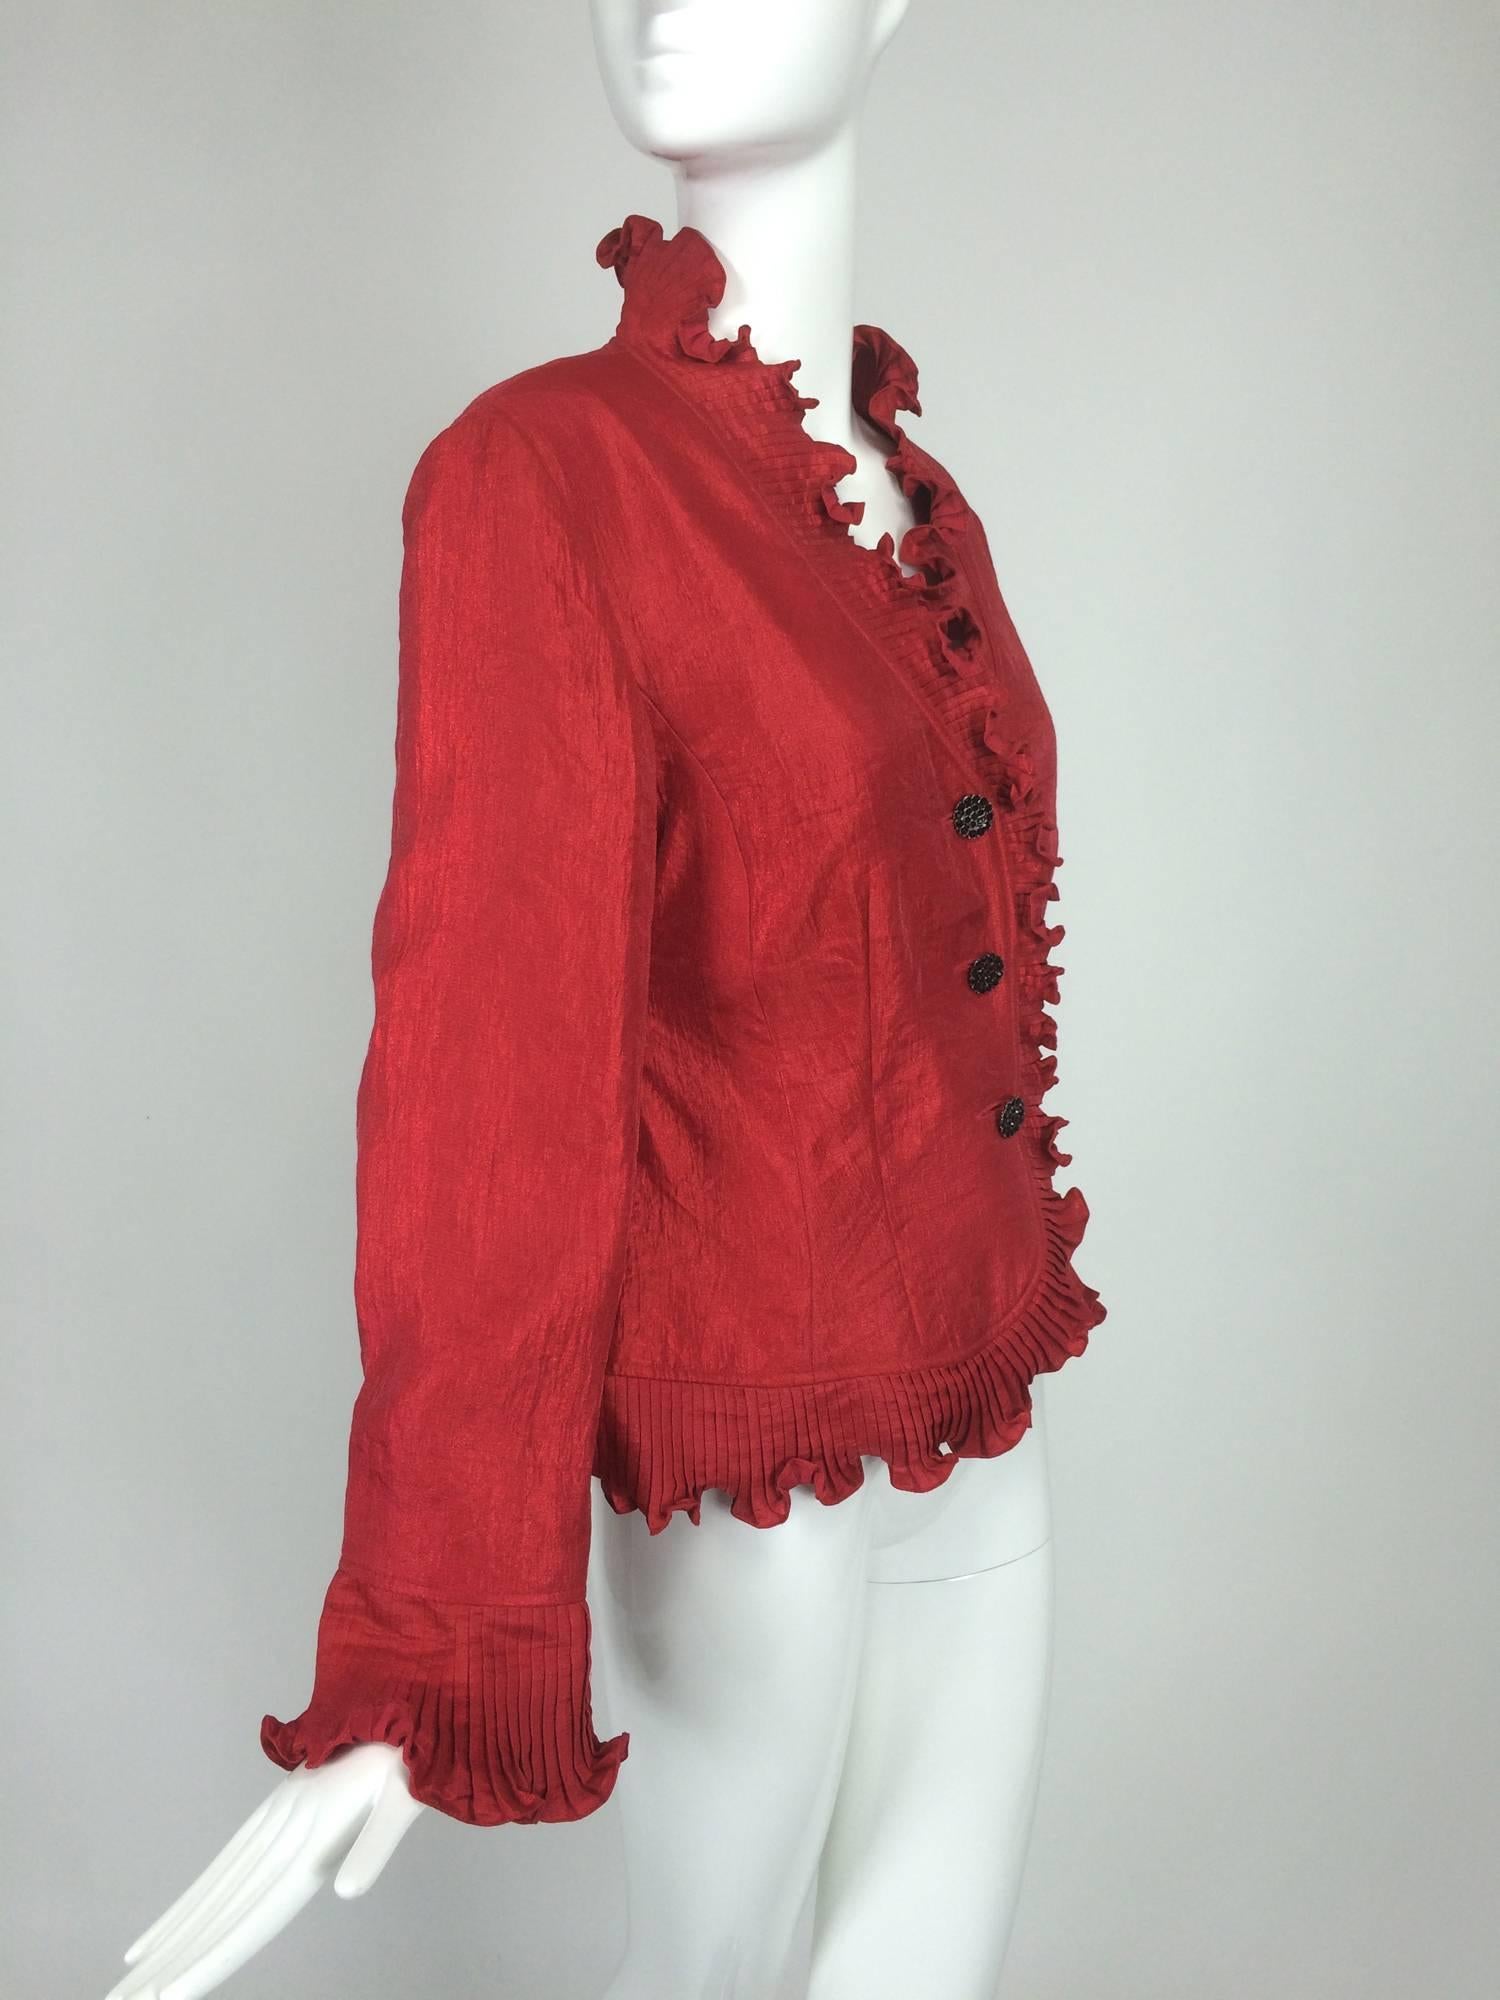 Women's Victor Costa shimmery red evening jacket with pleated ruffle trims 